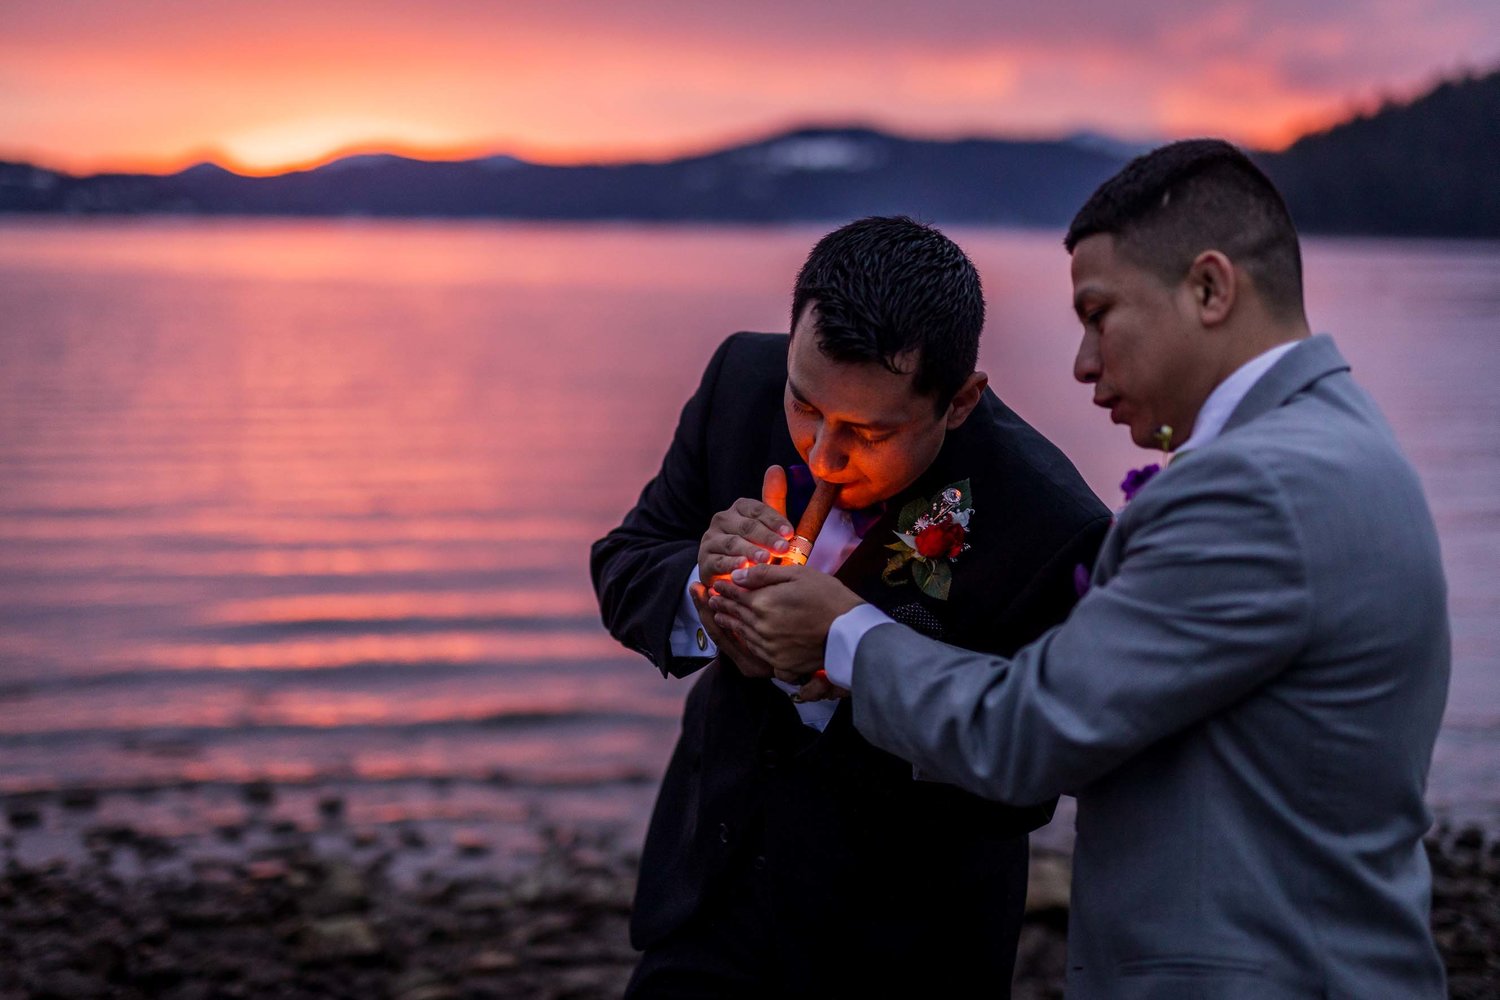 A groom with his best man lighting a cigar near a water body during sunset